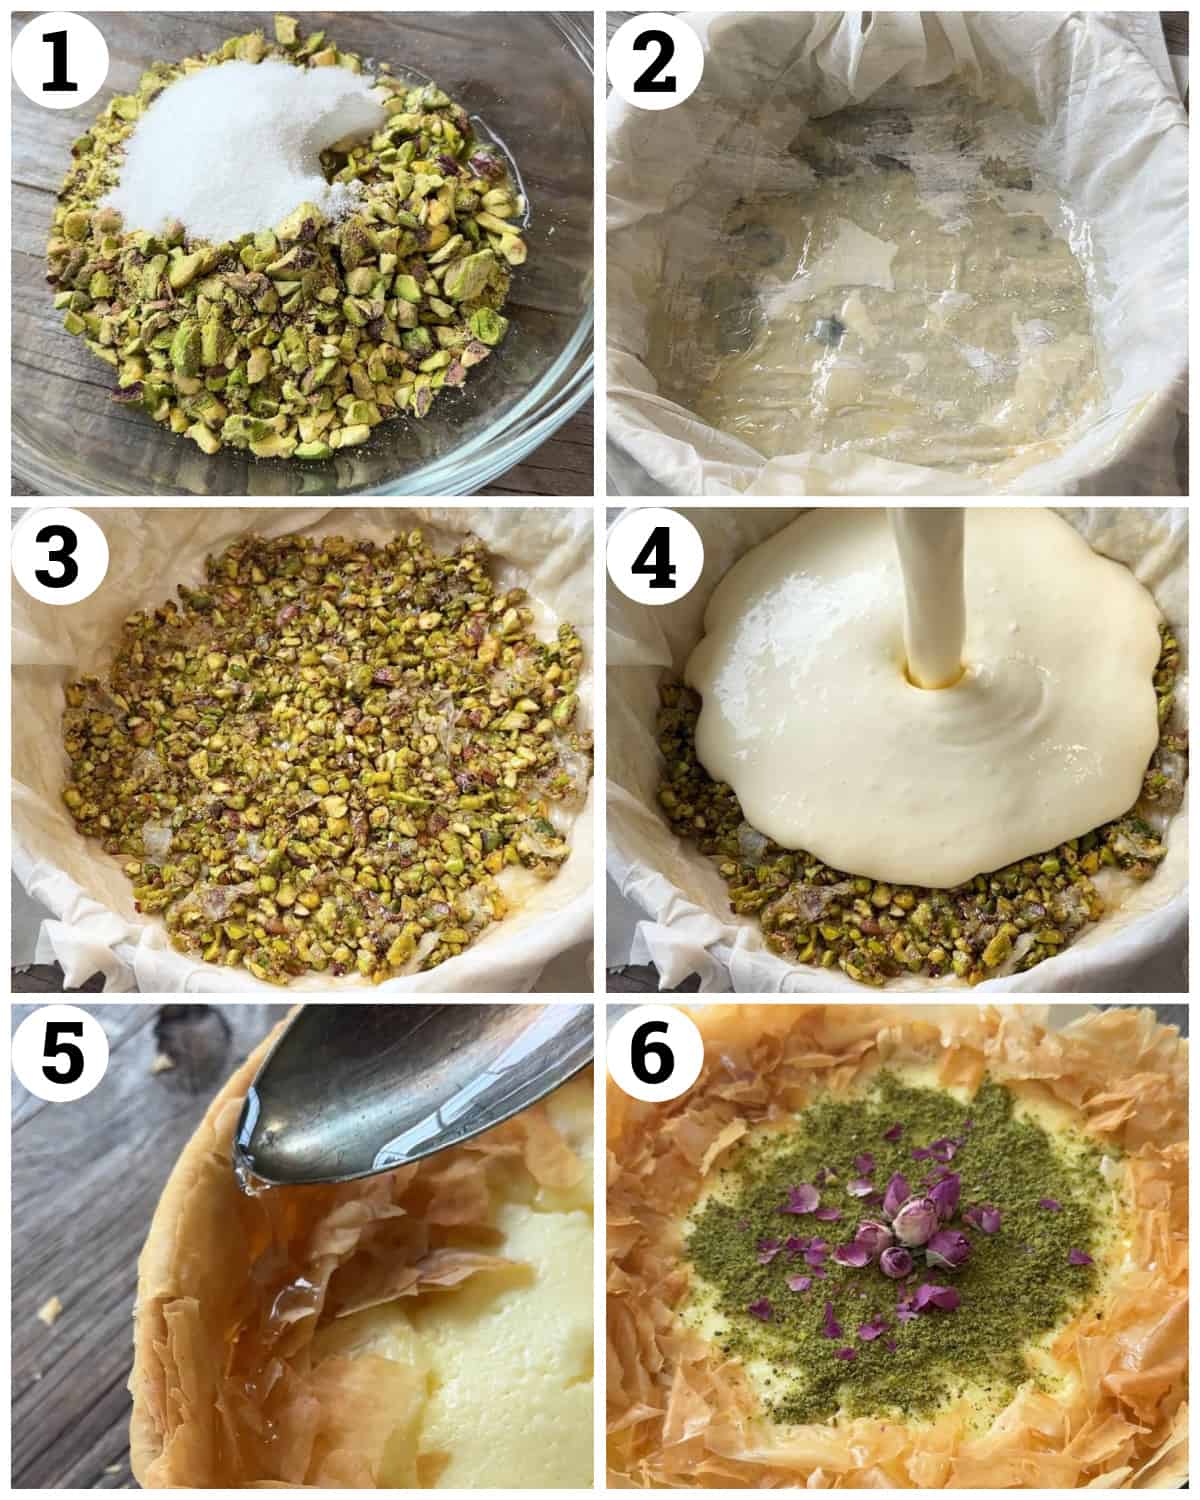 Mix the pistachios with the sugar and set aside. Line the pan with phyllo dough and brush with butter. Top with pistachios. Make the batter and bake in the oven for 50 minutes then chill in the fridge for 8 hours. 